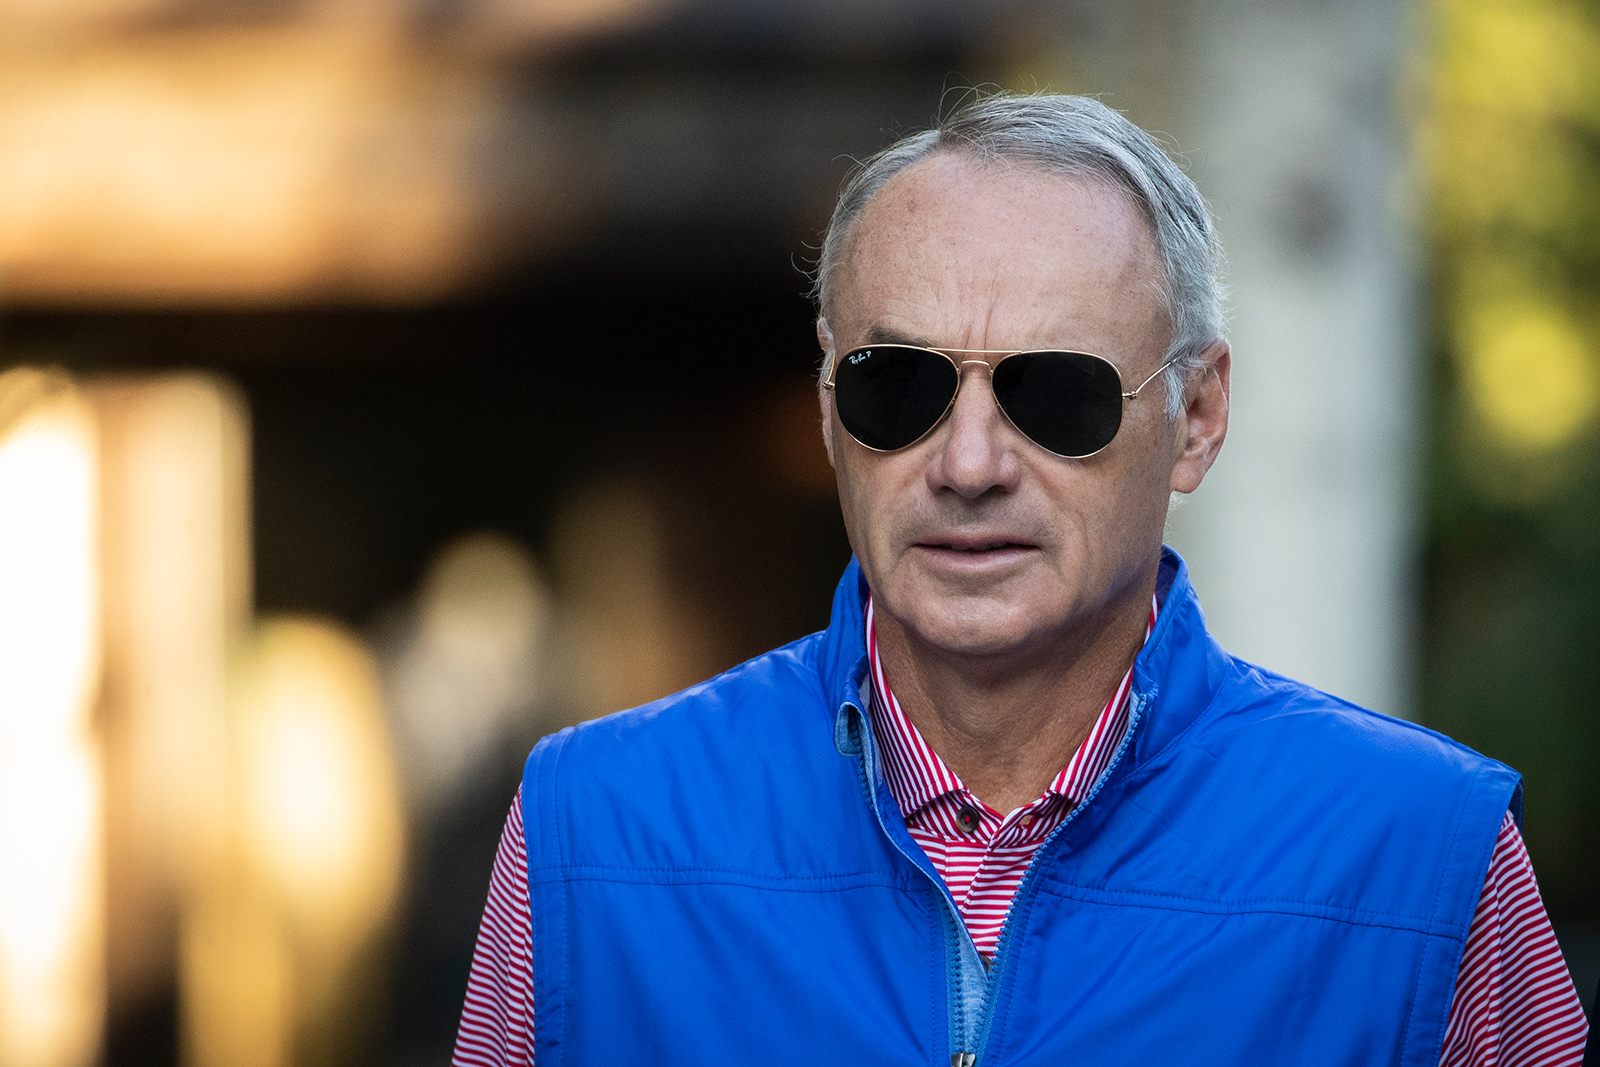 In this July 12, 2019 photo, Rob Manfred, commissioner of Major League Baseball, attends the annual Allen & Company Sun Valley Conference in Sun Valley, Idaho.